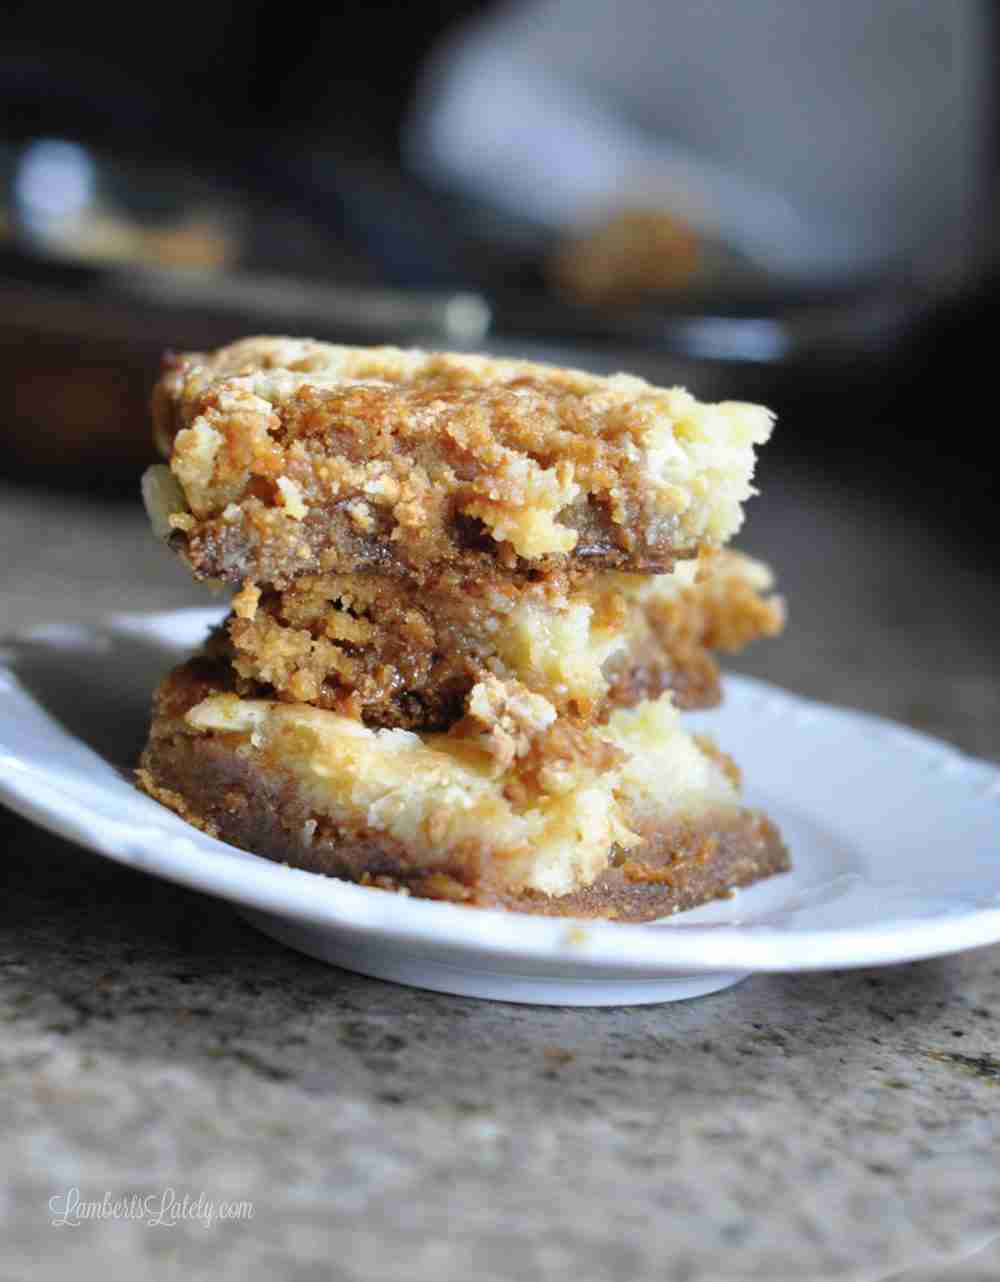 Salted Caramel Chess Squares are such a delicious dessert recipe for fall or winter! Rich caramel sauce and buttery cake make these bars so great for a party or potluck.